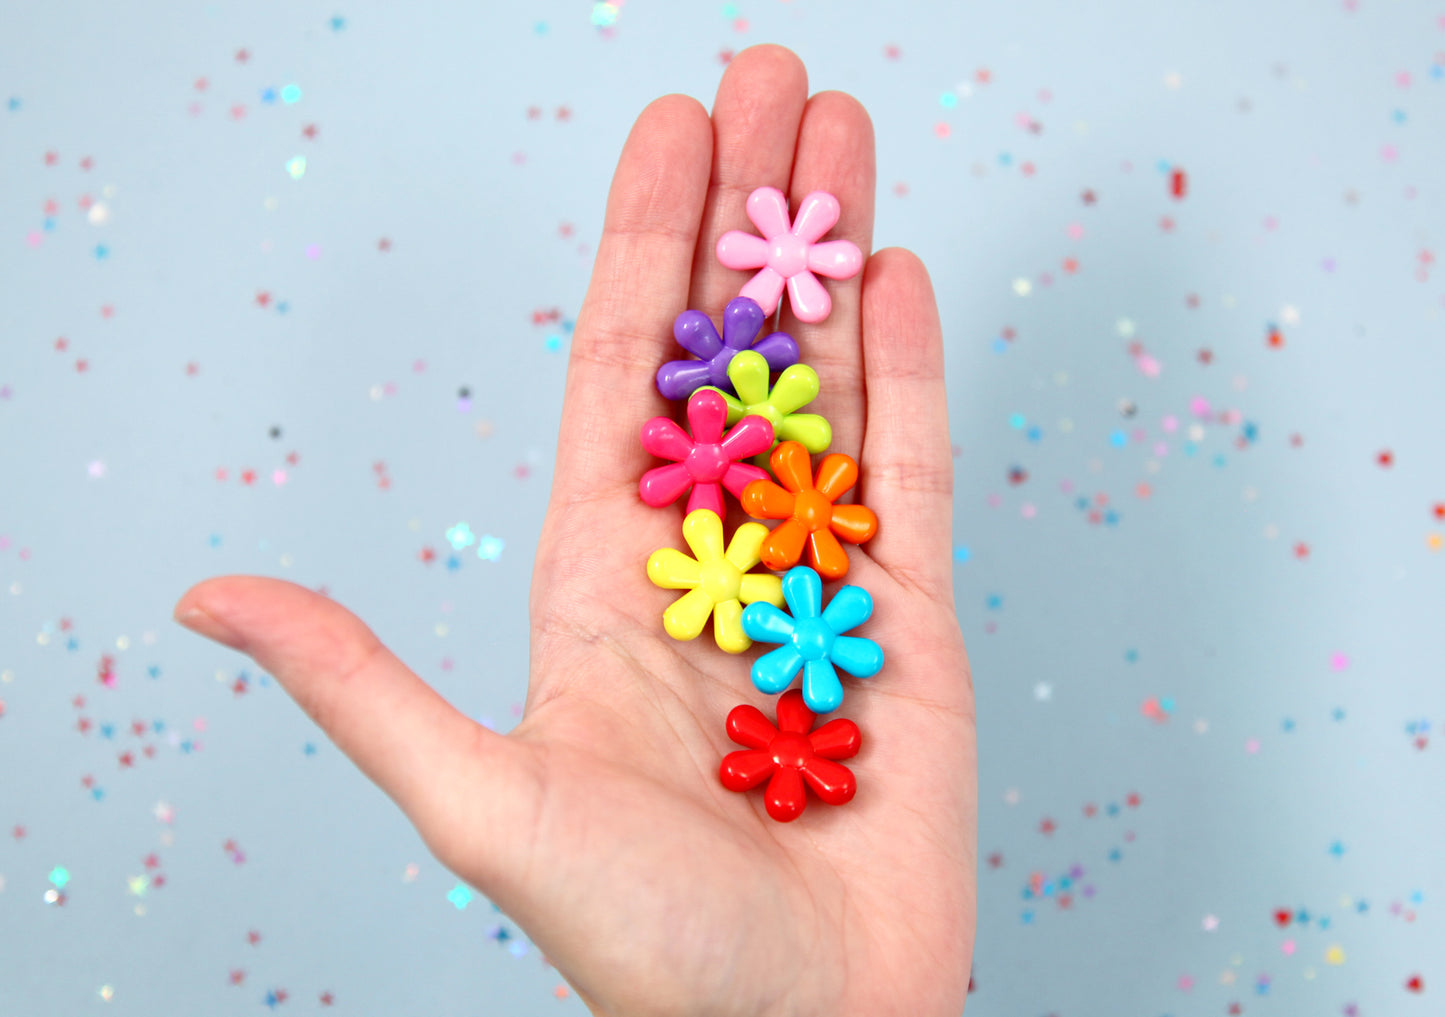 Flower Beads - 23mm Big Colorful Opaque Retro Flower Bead Plastic Acrylic or Resin Beads – 40 pc set